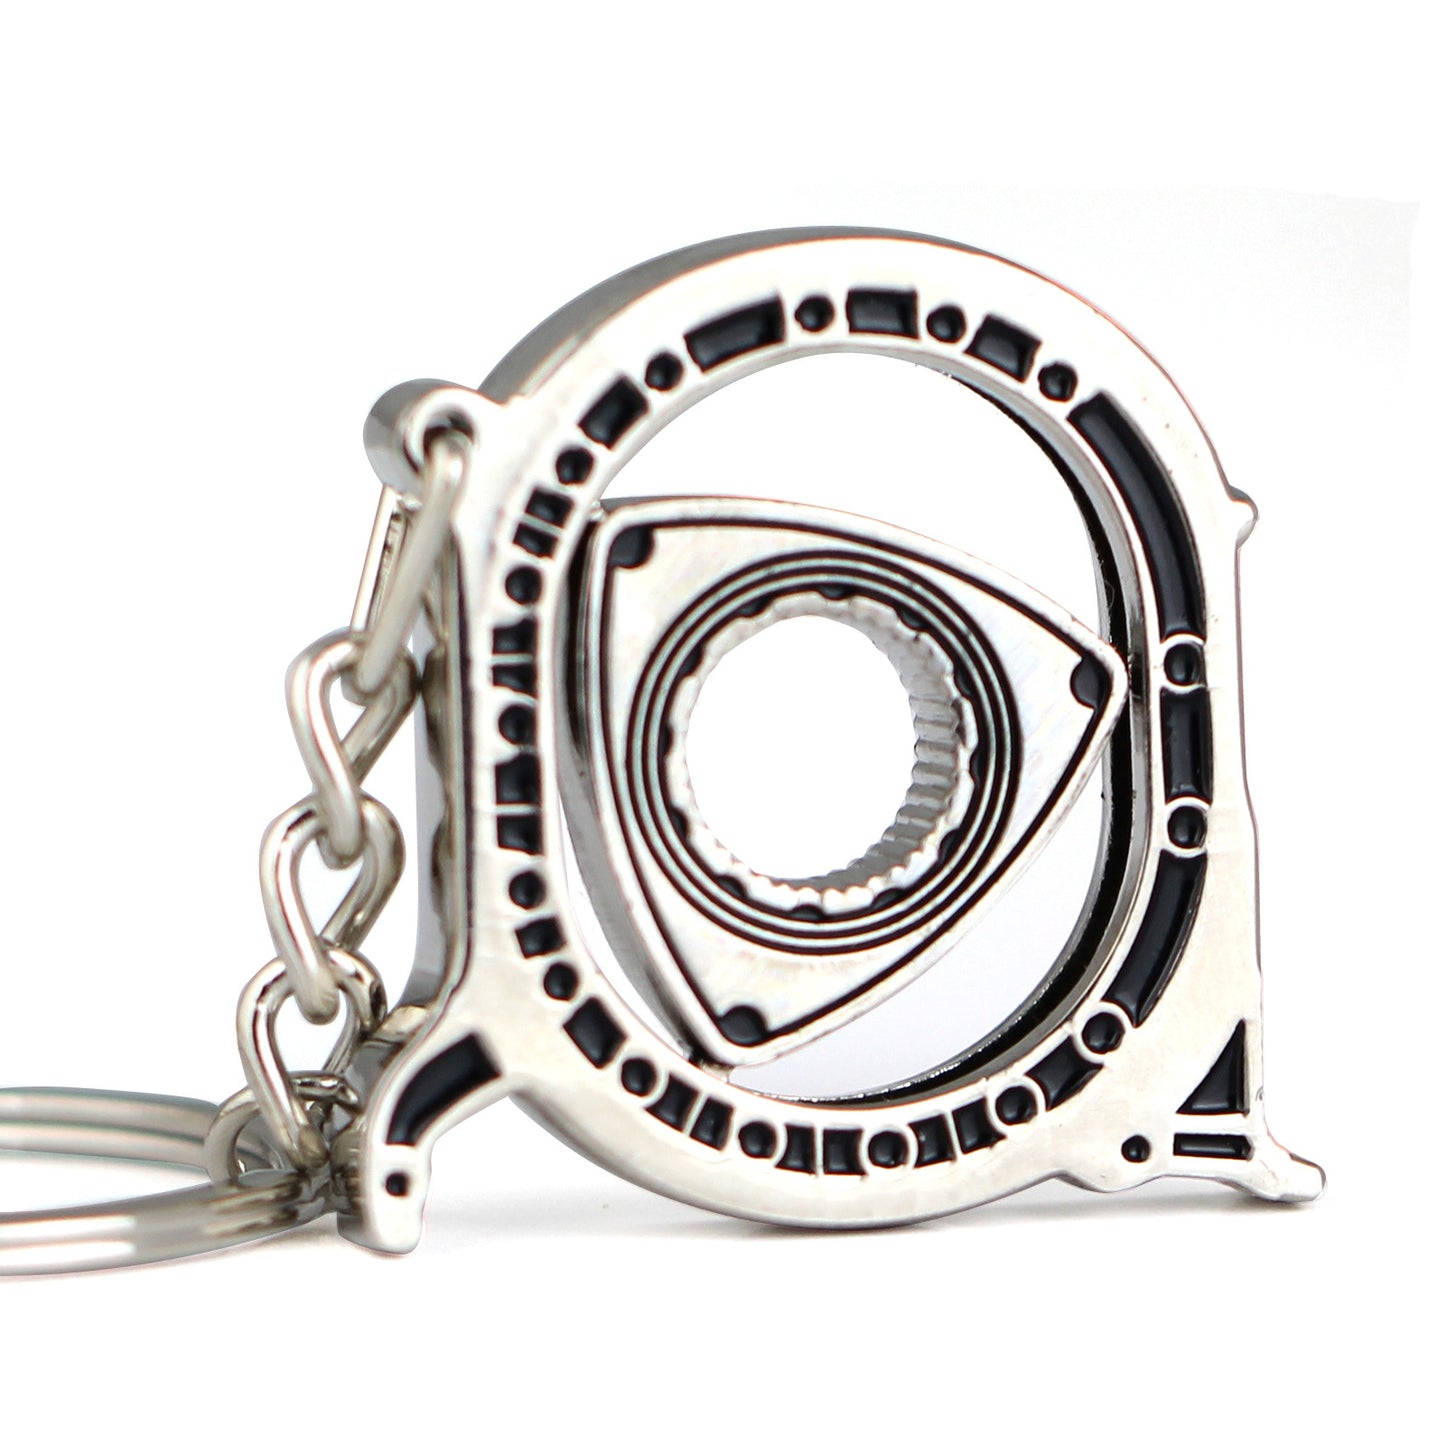 Can Be Rotated 360 Degrees Car Engine Rotor Keychain Gift